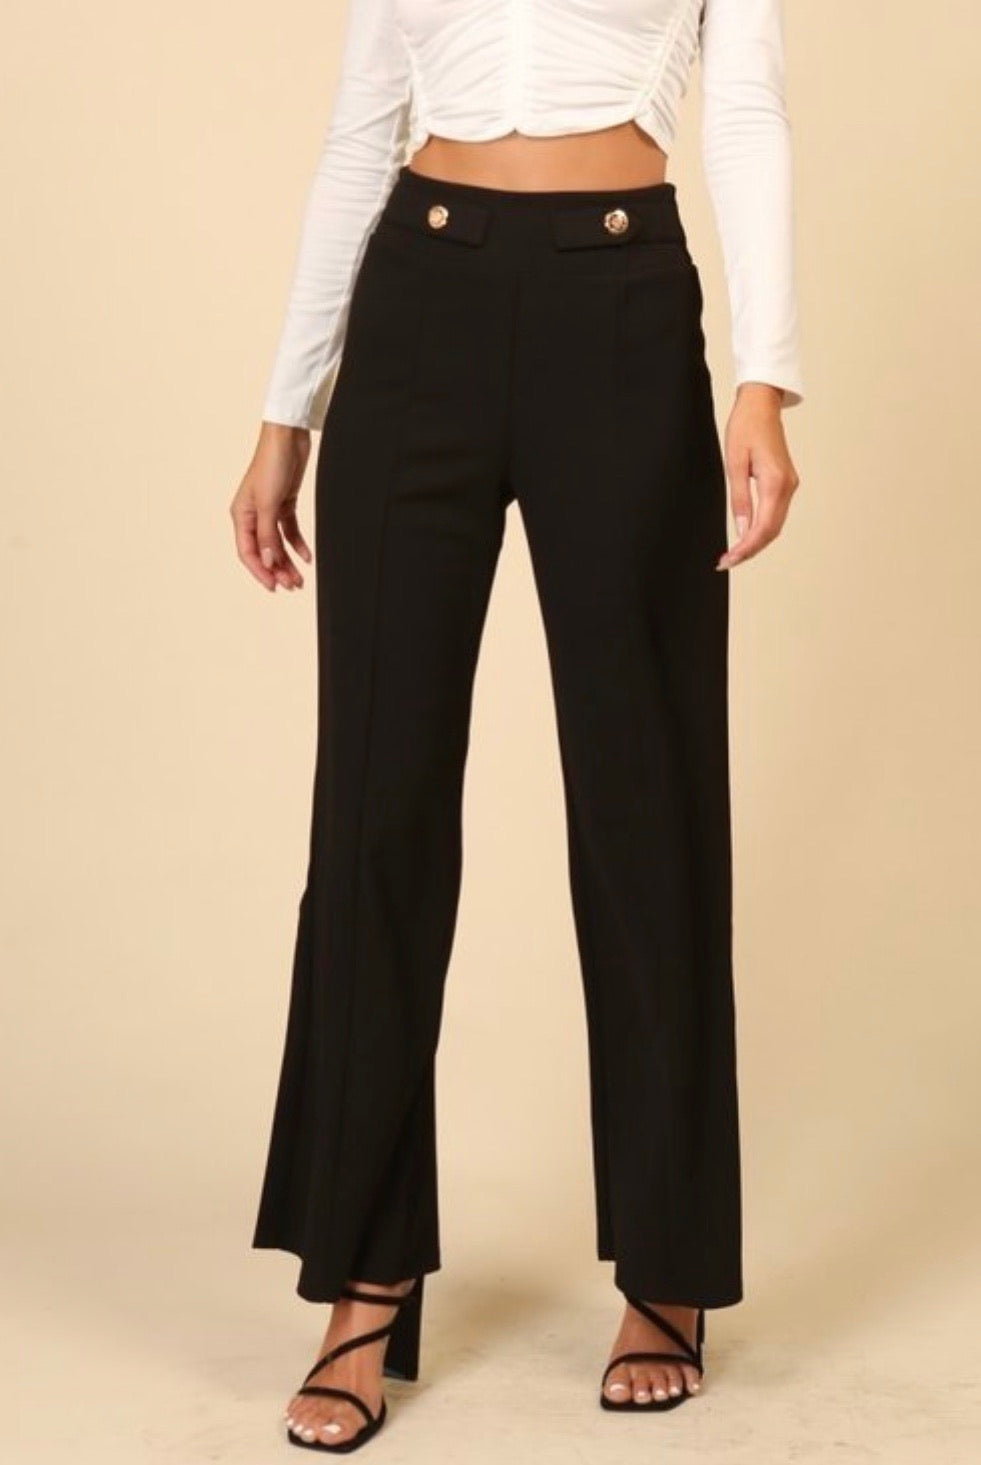 Karla High Waist Wide-leg Pants - Corinne an Affordable Women's Clothing Boutique in the US USA